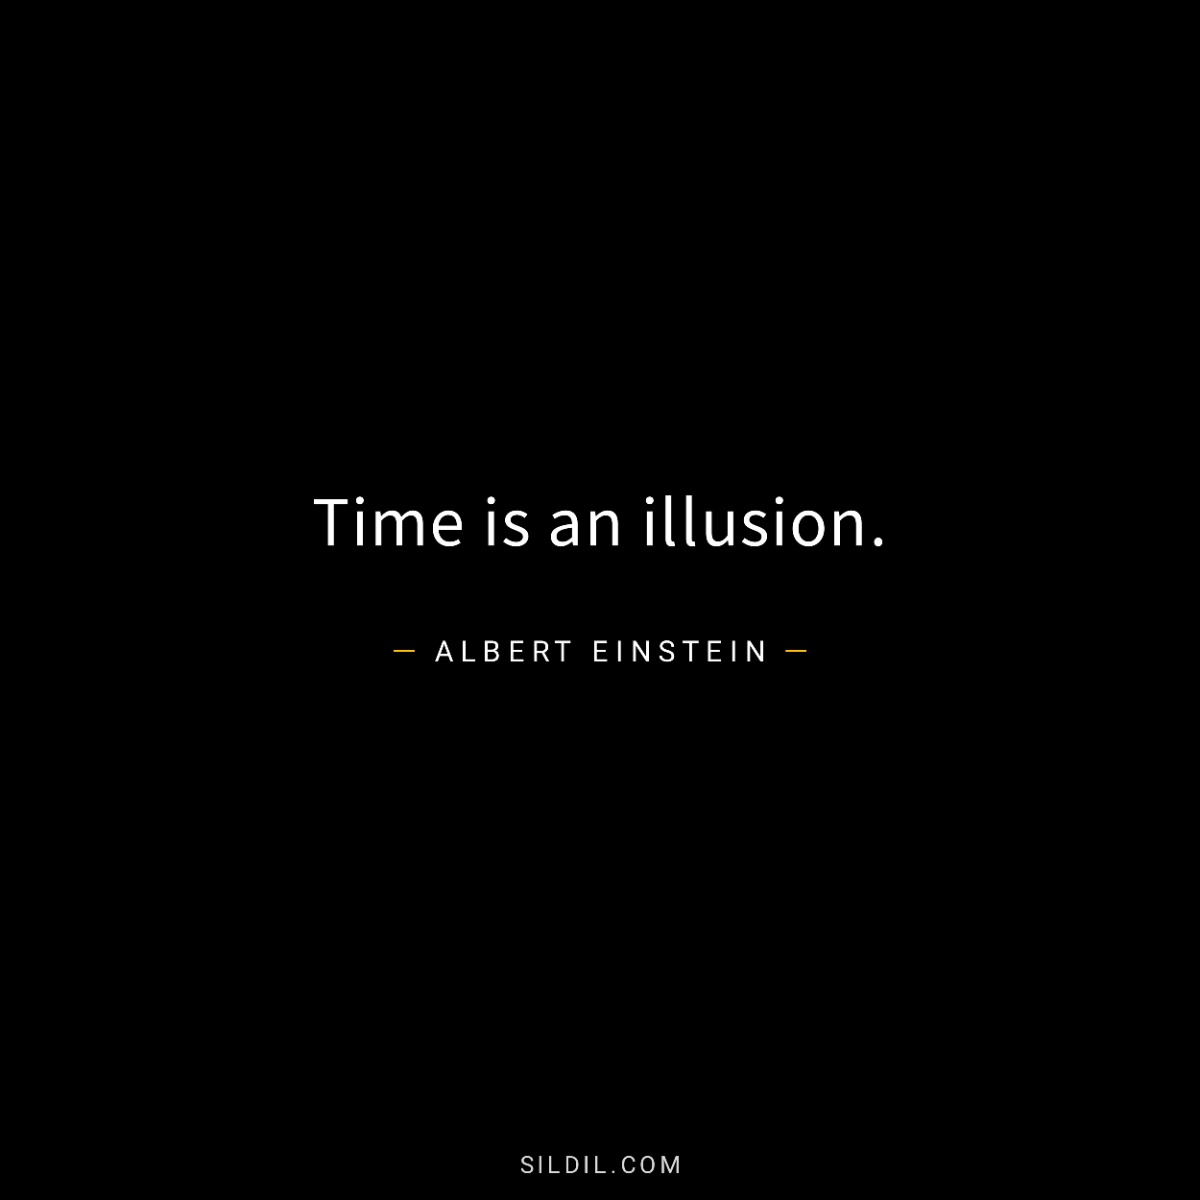 Time is an illusion.